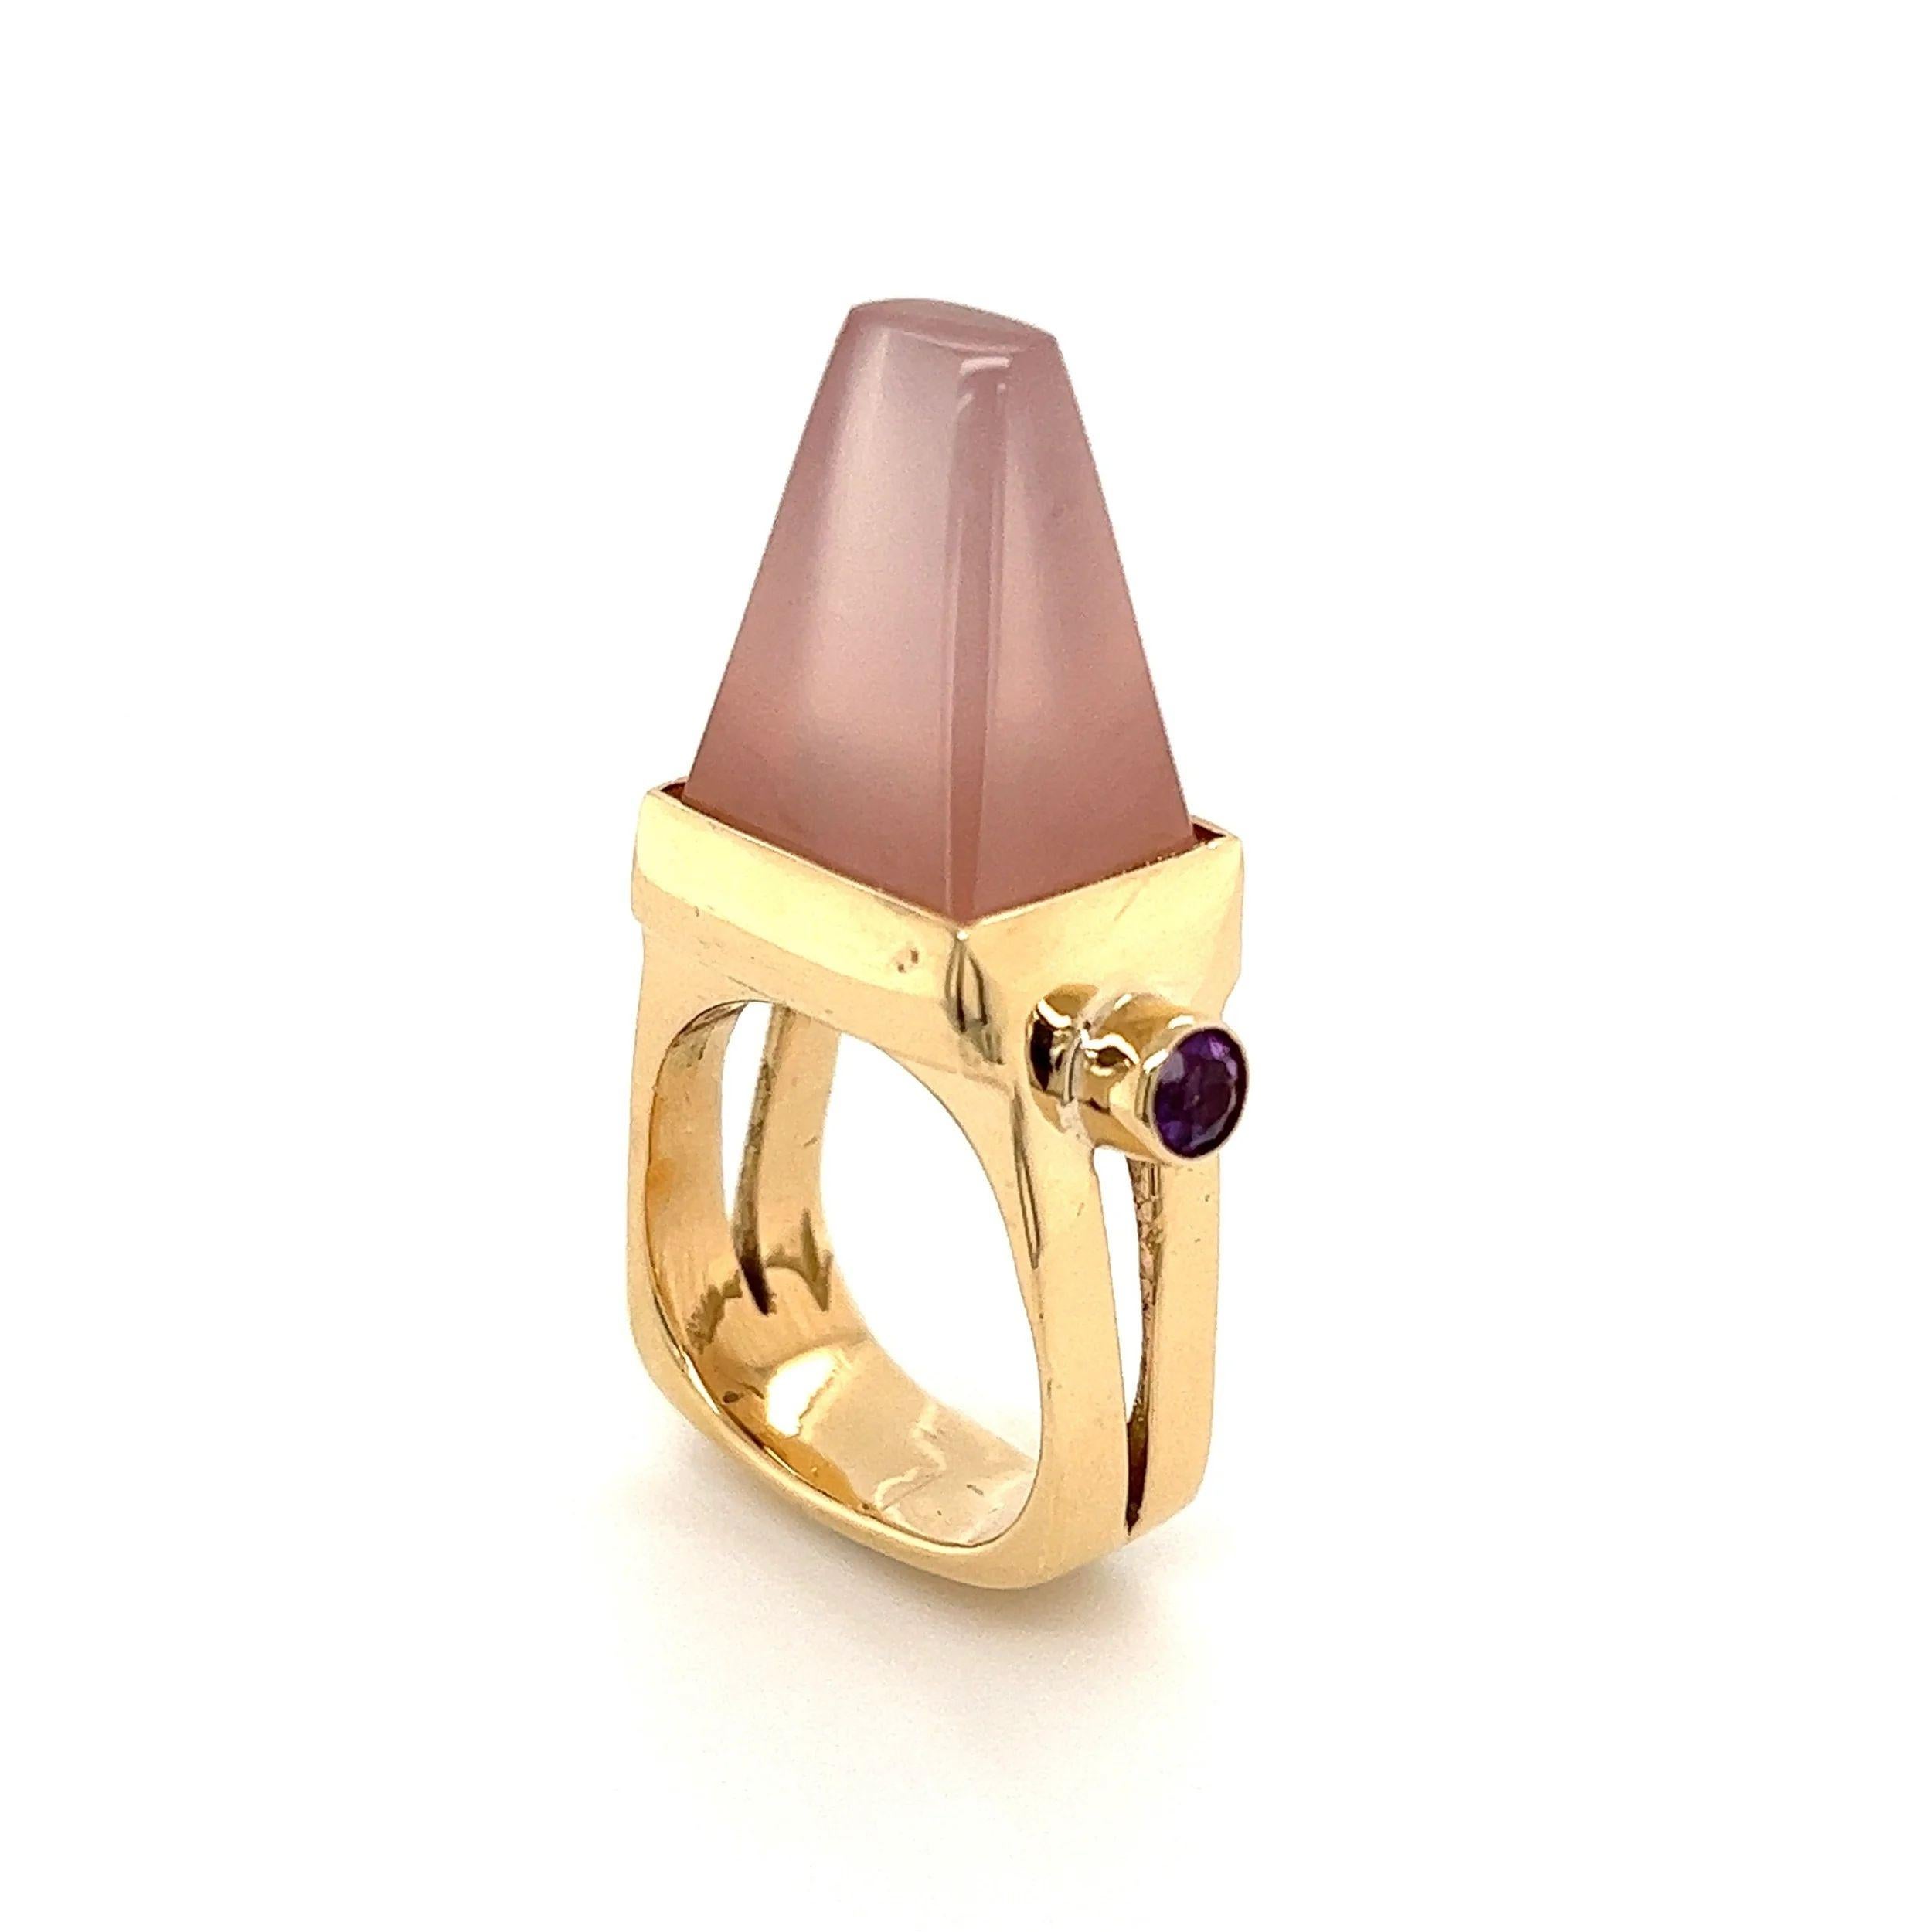 Simply Beautiful! Finely detailed Rose Quartz and Diamond Vintage Gold Ring. Centering a securely nestled Hand set Pyramid Rose Quartz, weighing approx. 6 Carats. Accented by Amethyst, weighing approx. 0.40tcw. Approx. dimensions: 1.52” l x 0. 91” w